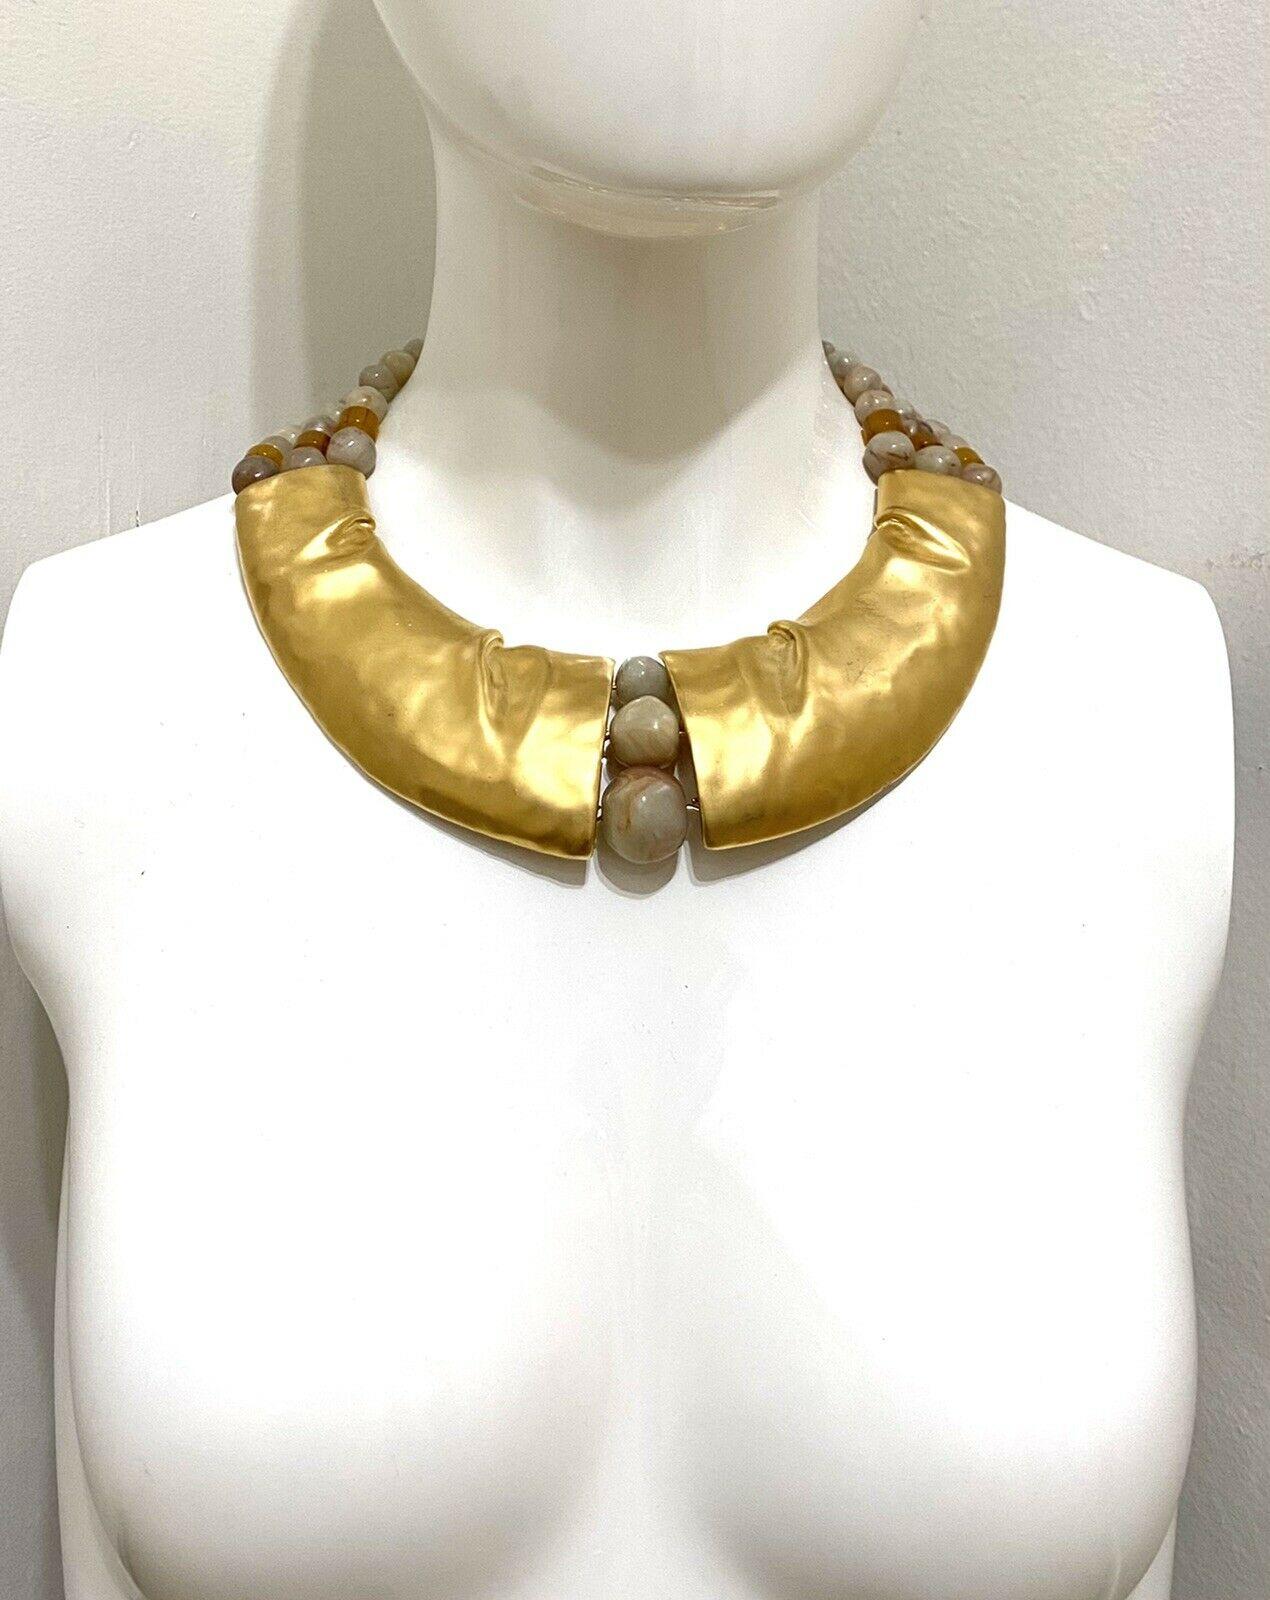 Awesome Signed Designer Trifari Modernist Golden Choker Necklace accented by 3 Strands of large Cream/Brown Lucite Beads set in Gold Gilt Mounting. Necklace measures approx. 19”l x 2”w. Signed: TRIFARI (C) on Clasp and Pendant. More Beautiful in